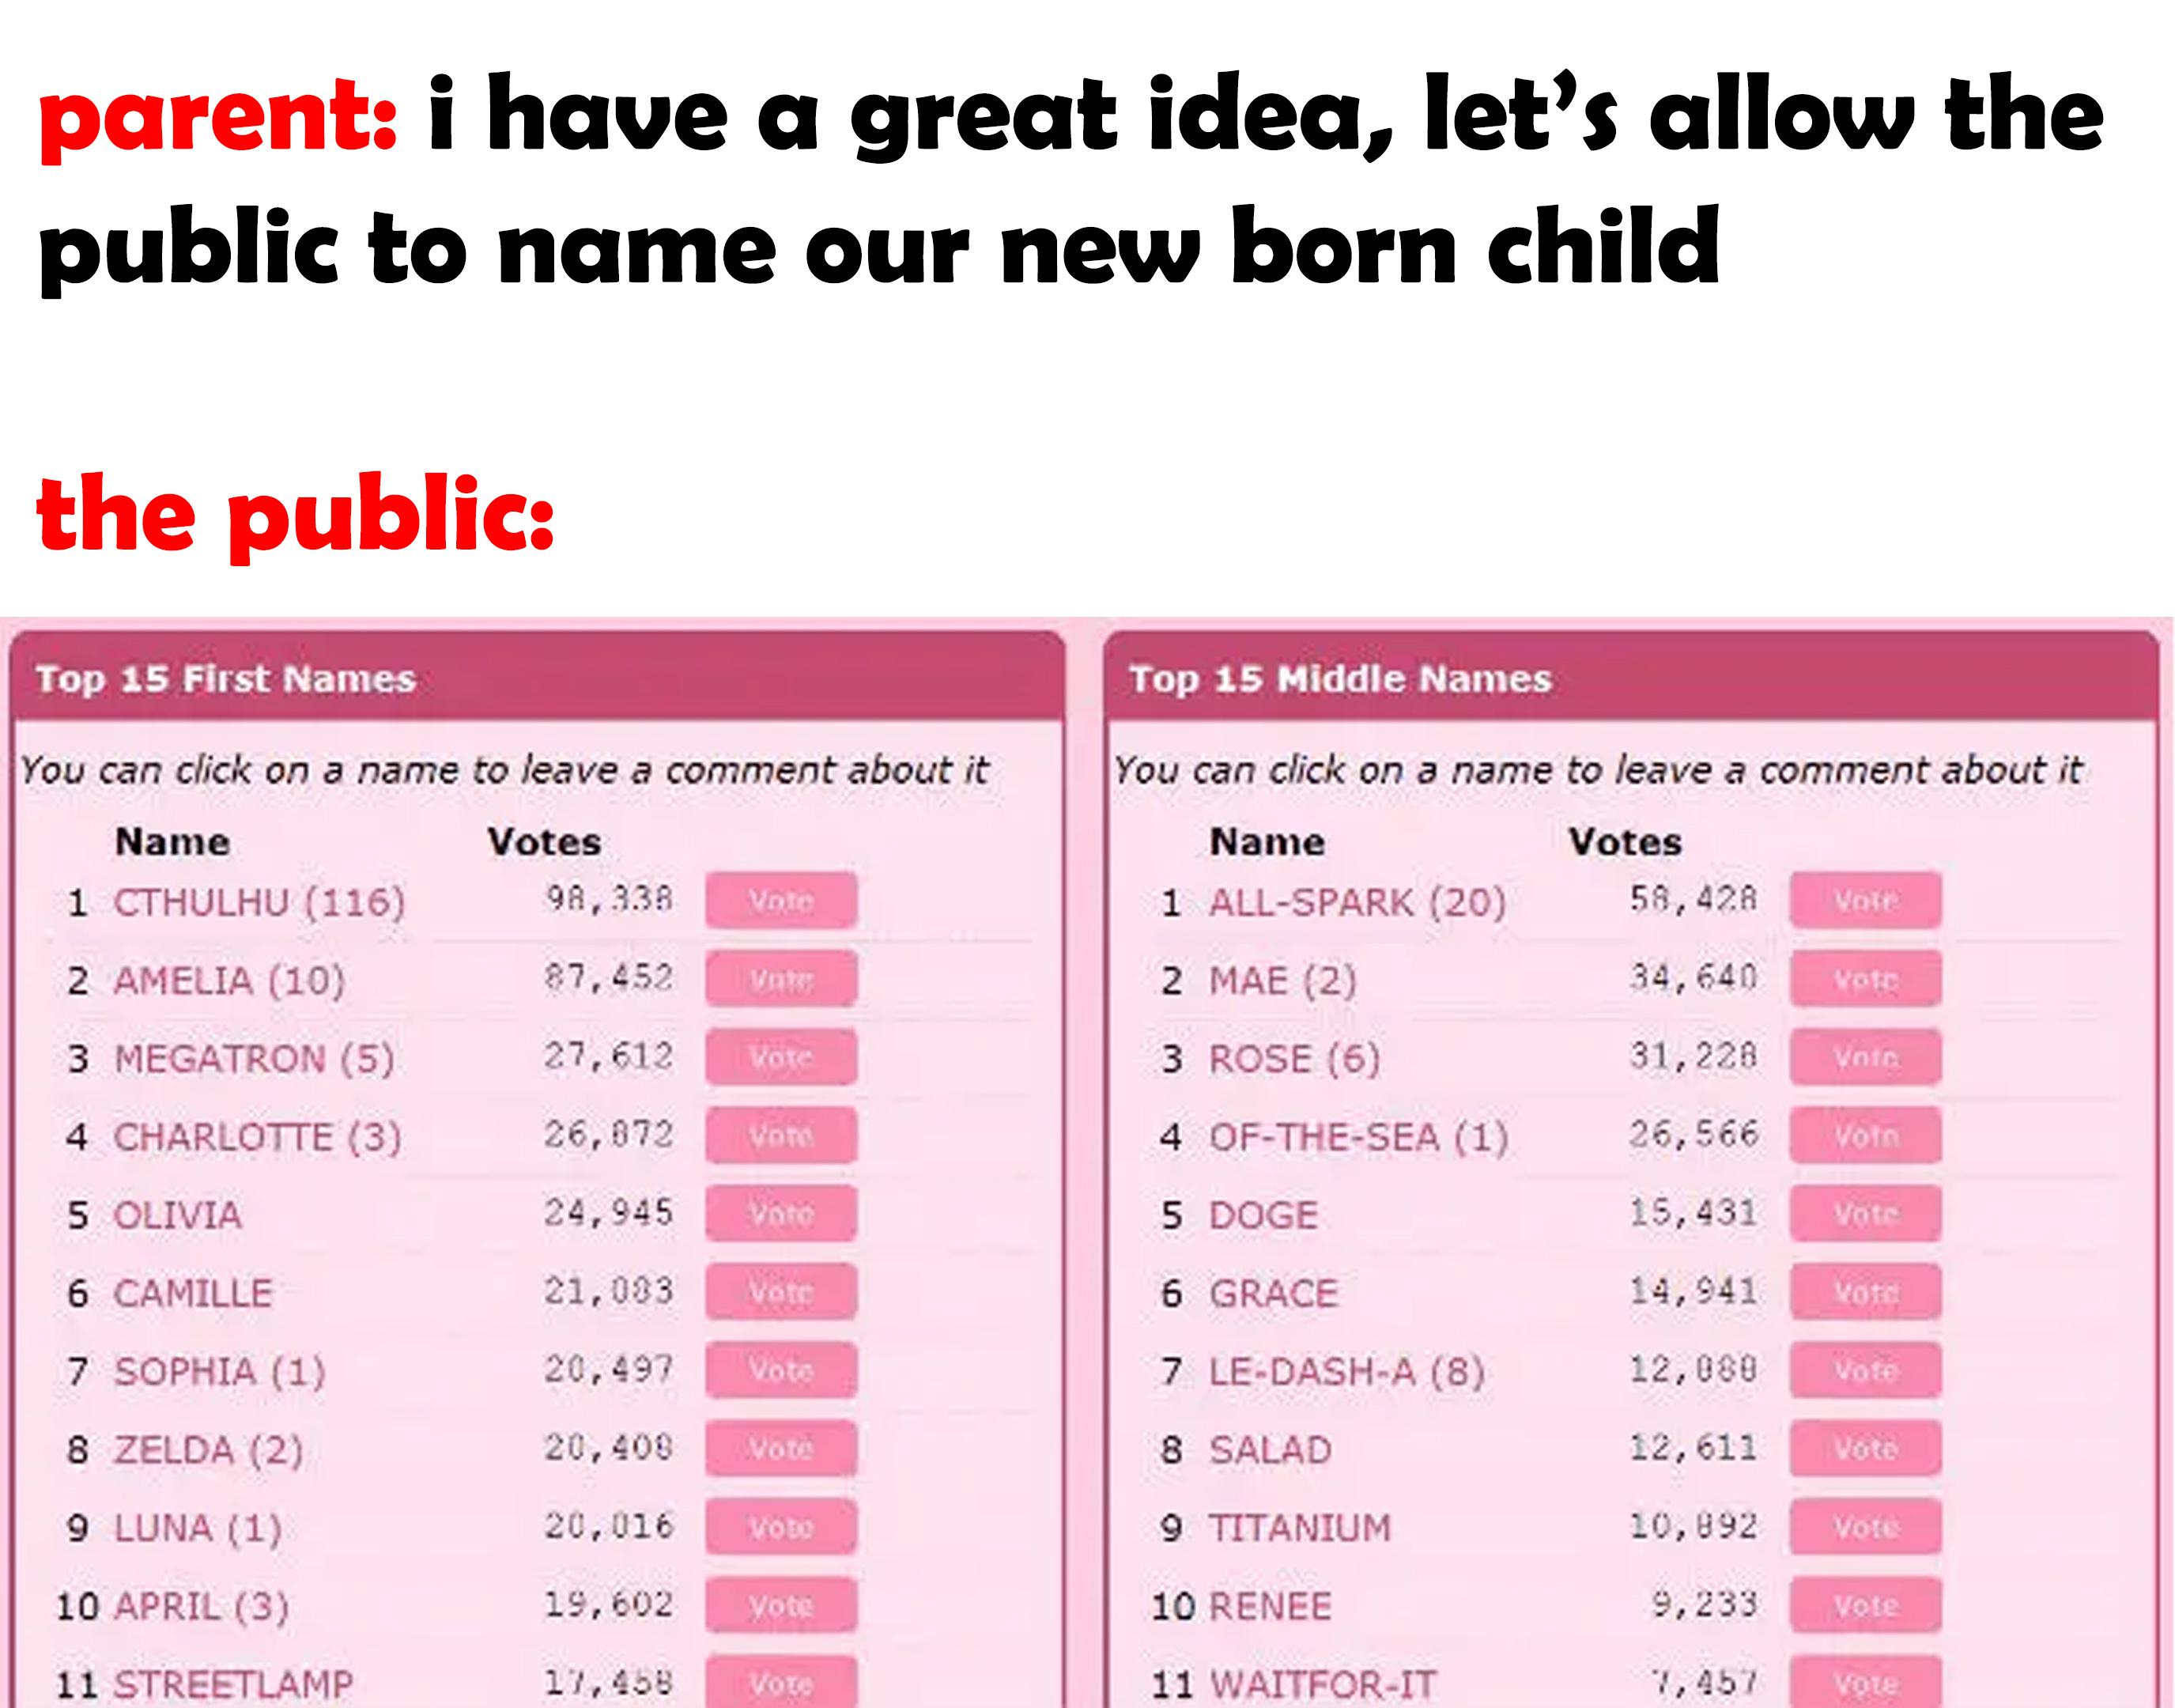 hilarious memes - number - parent i have a great idea, let's allow the public to name our new born child the public Top 15 Middle Names Top 15 First Names You can click on a name to leave a comment about it Name Votes 1 Cthulhu 116 9A, 338 Vote 2 Amelia 1